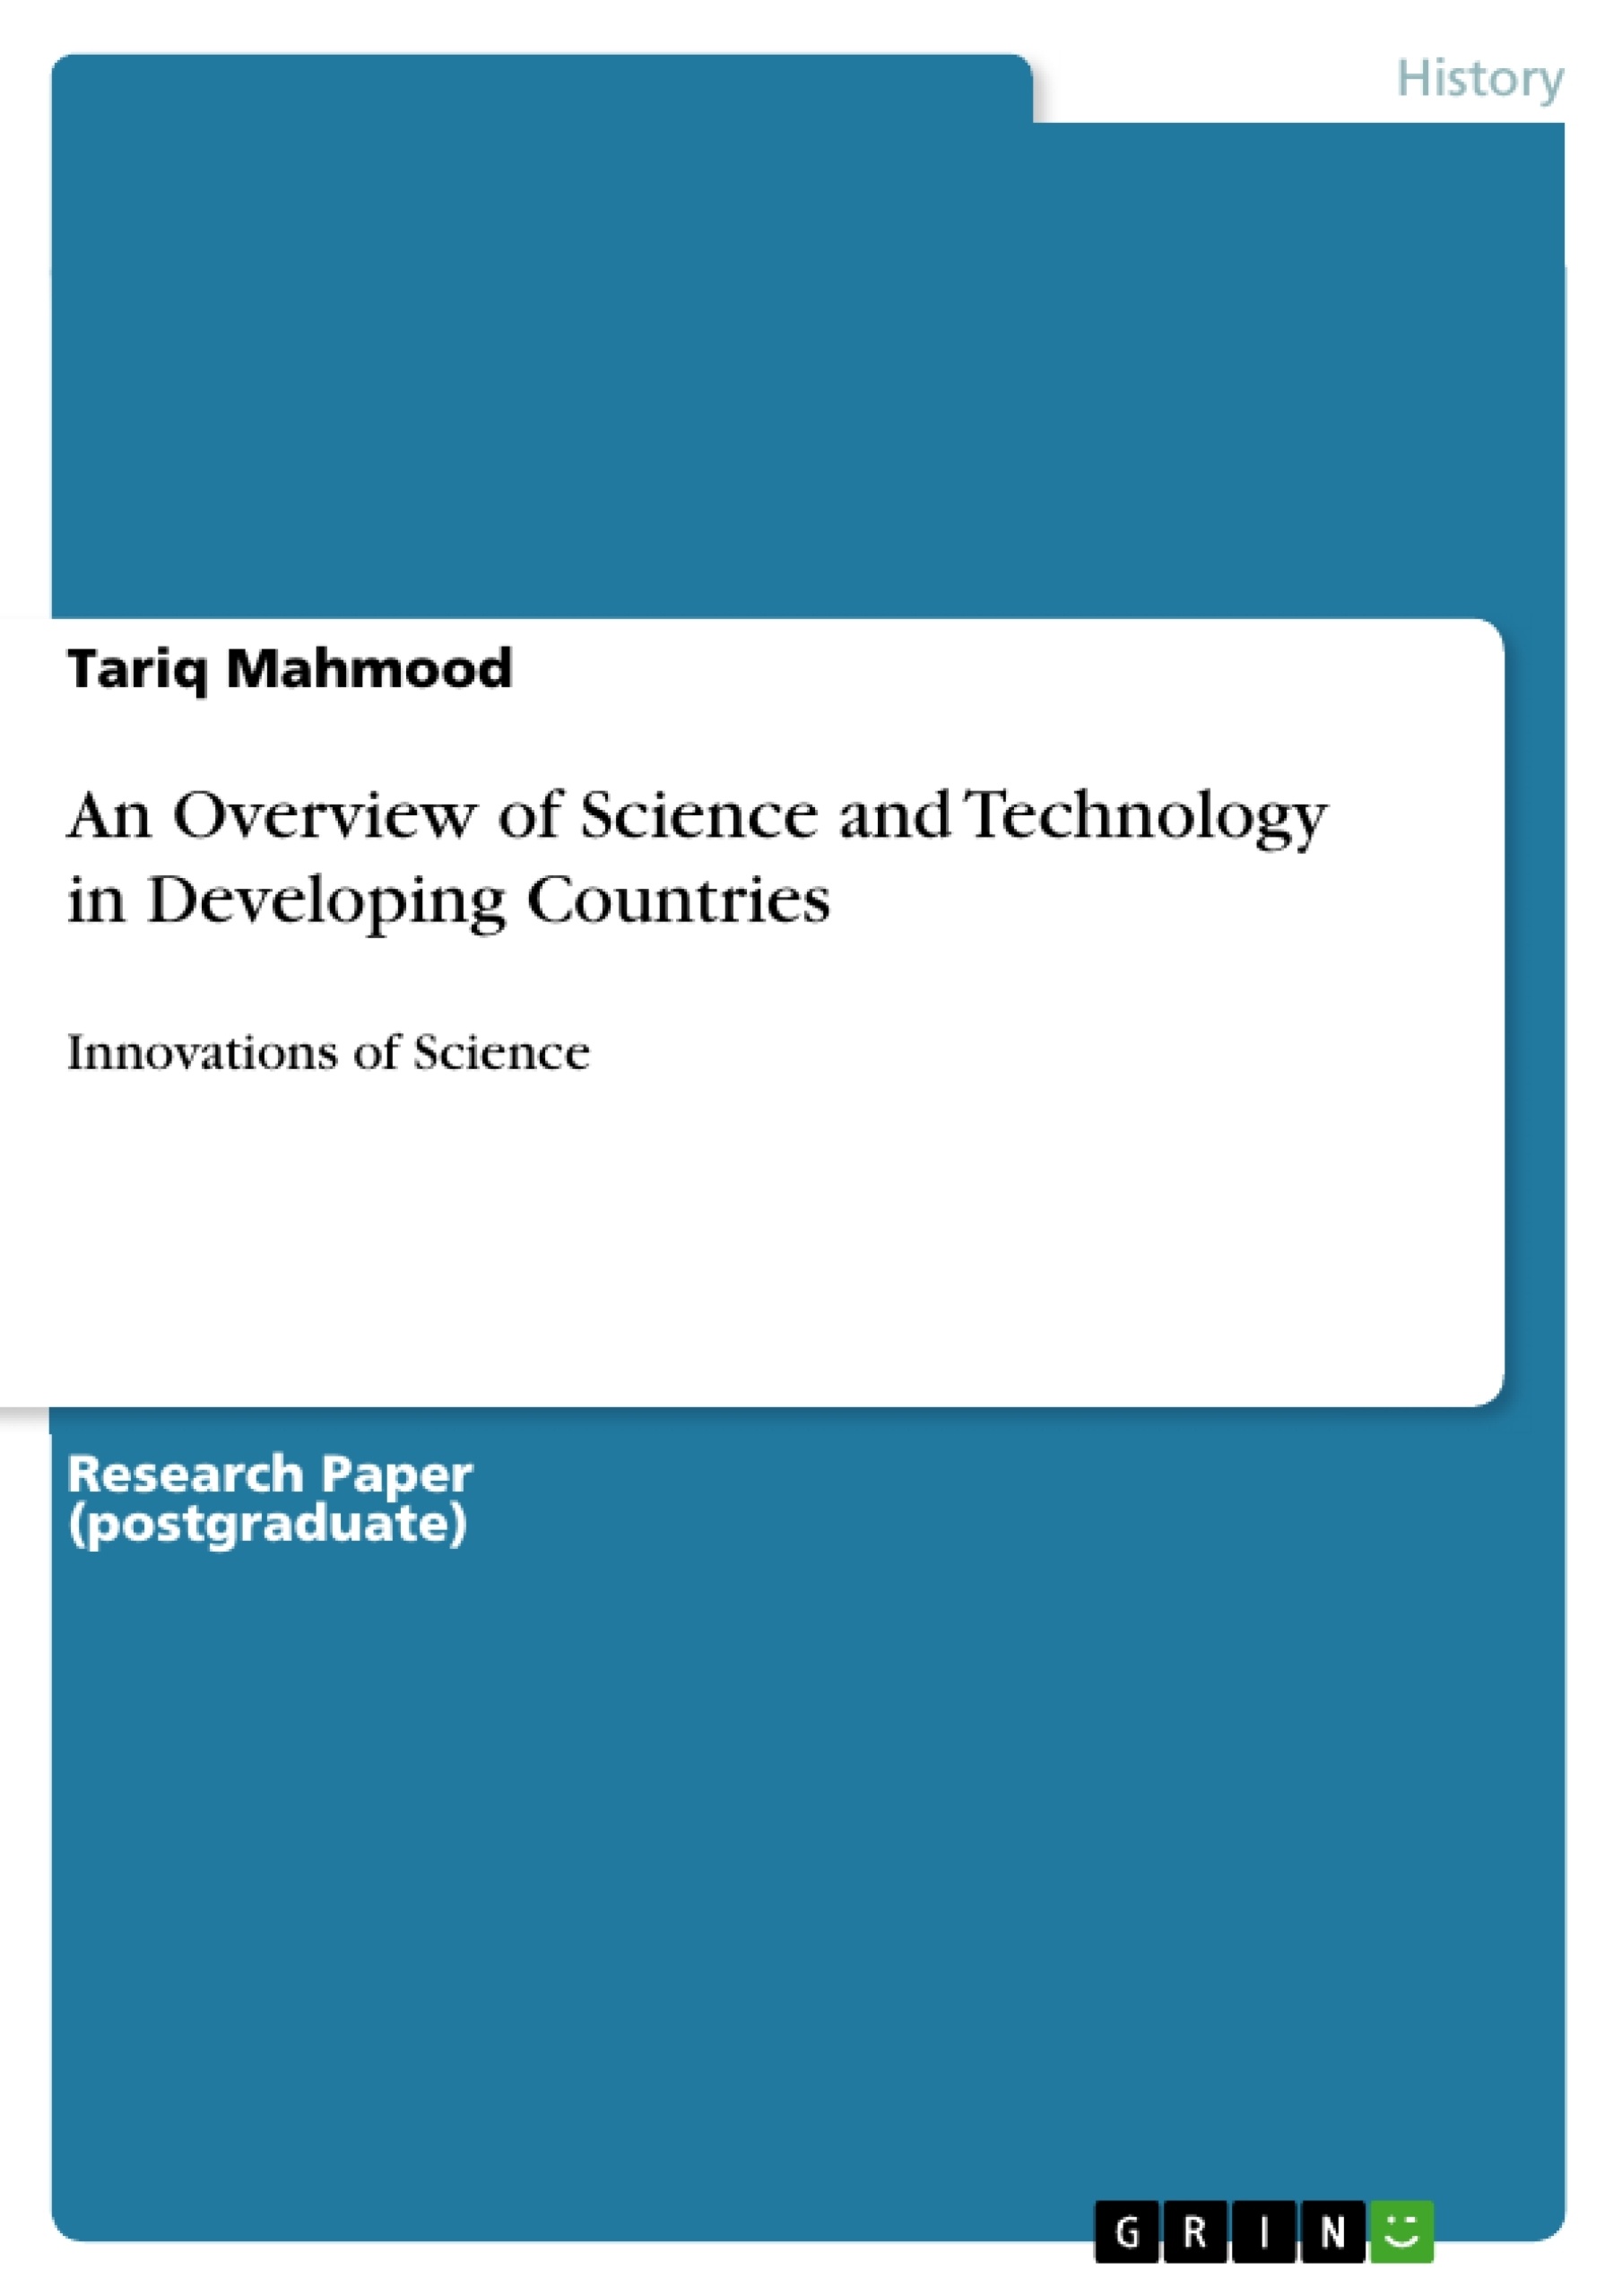 Titre: An Overview of Science and Technology in Developing Countries